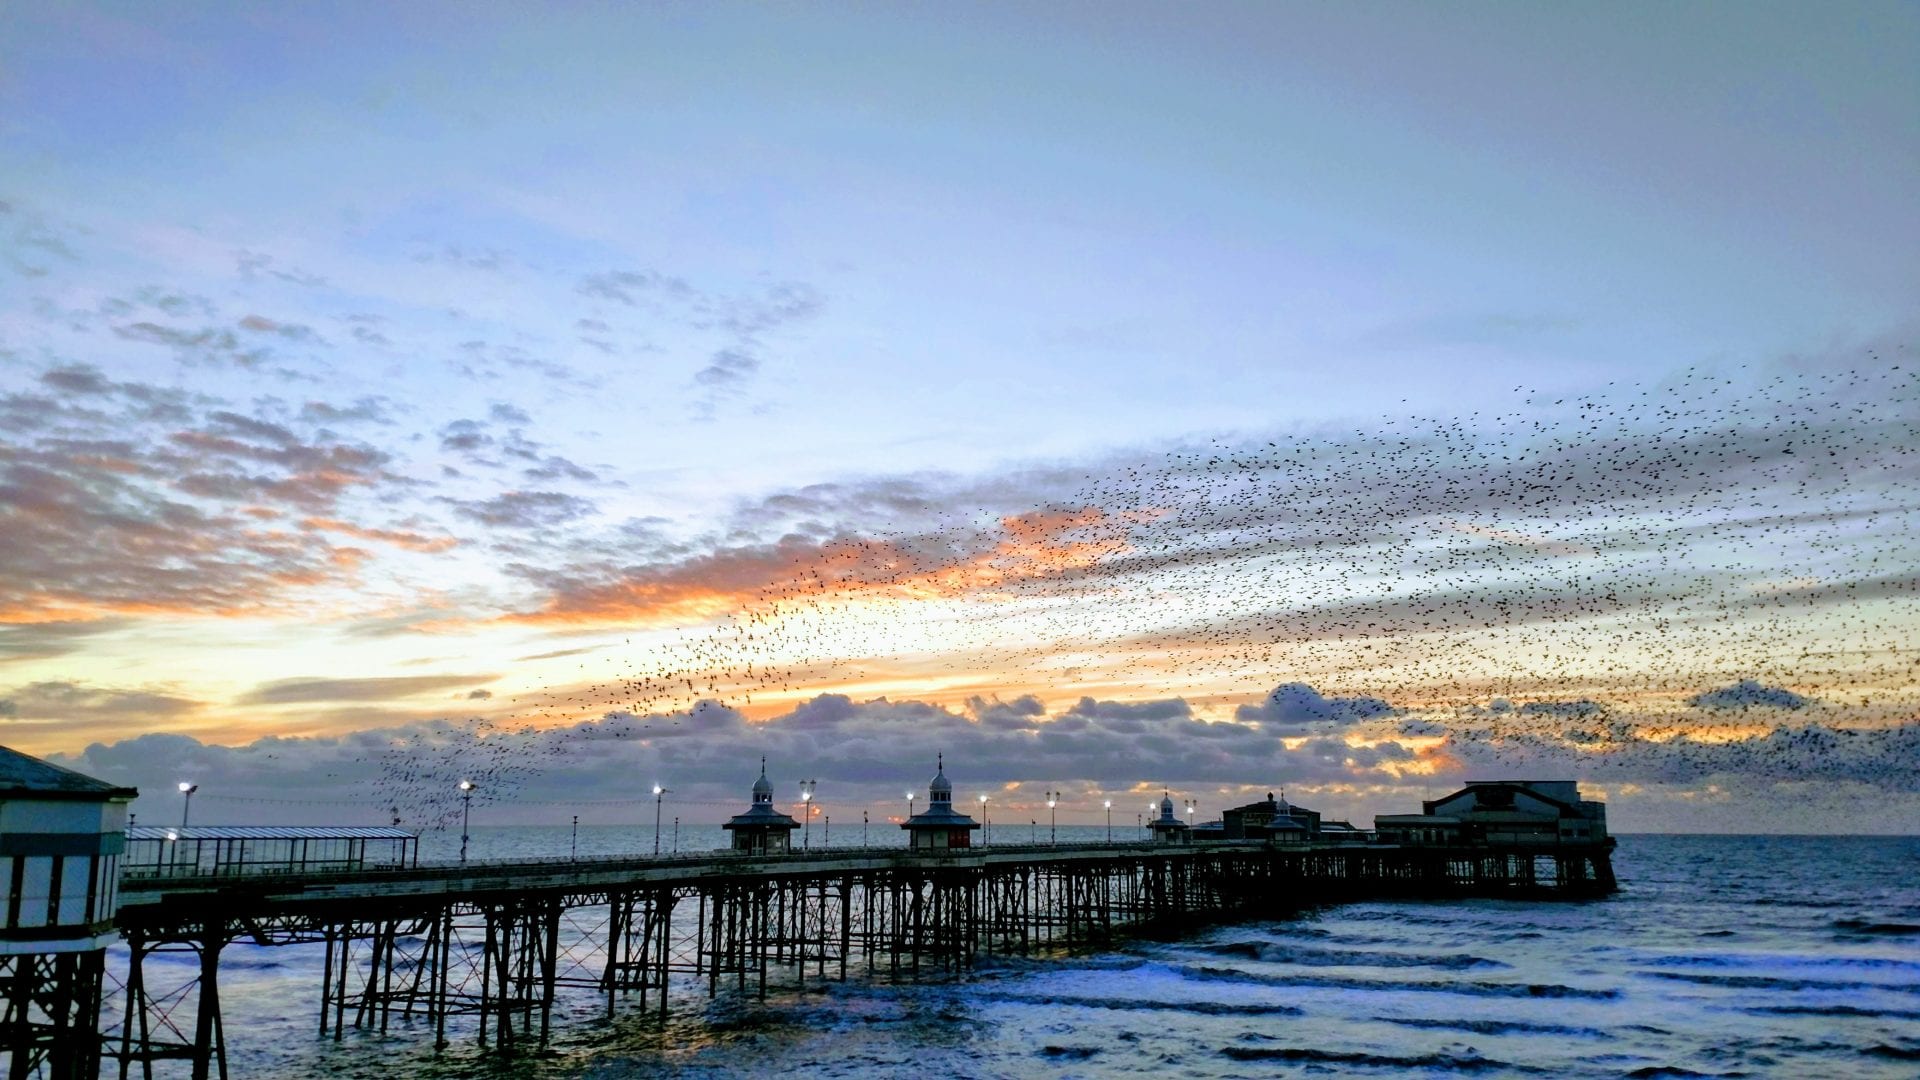 Starlings and North Pier at sunset by Neil Curtis from Wolverhampton